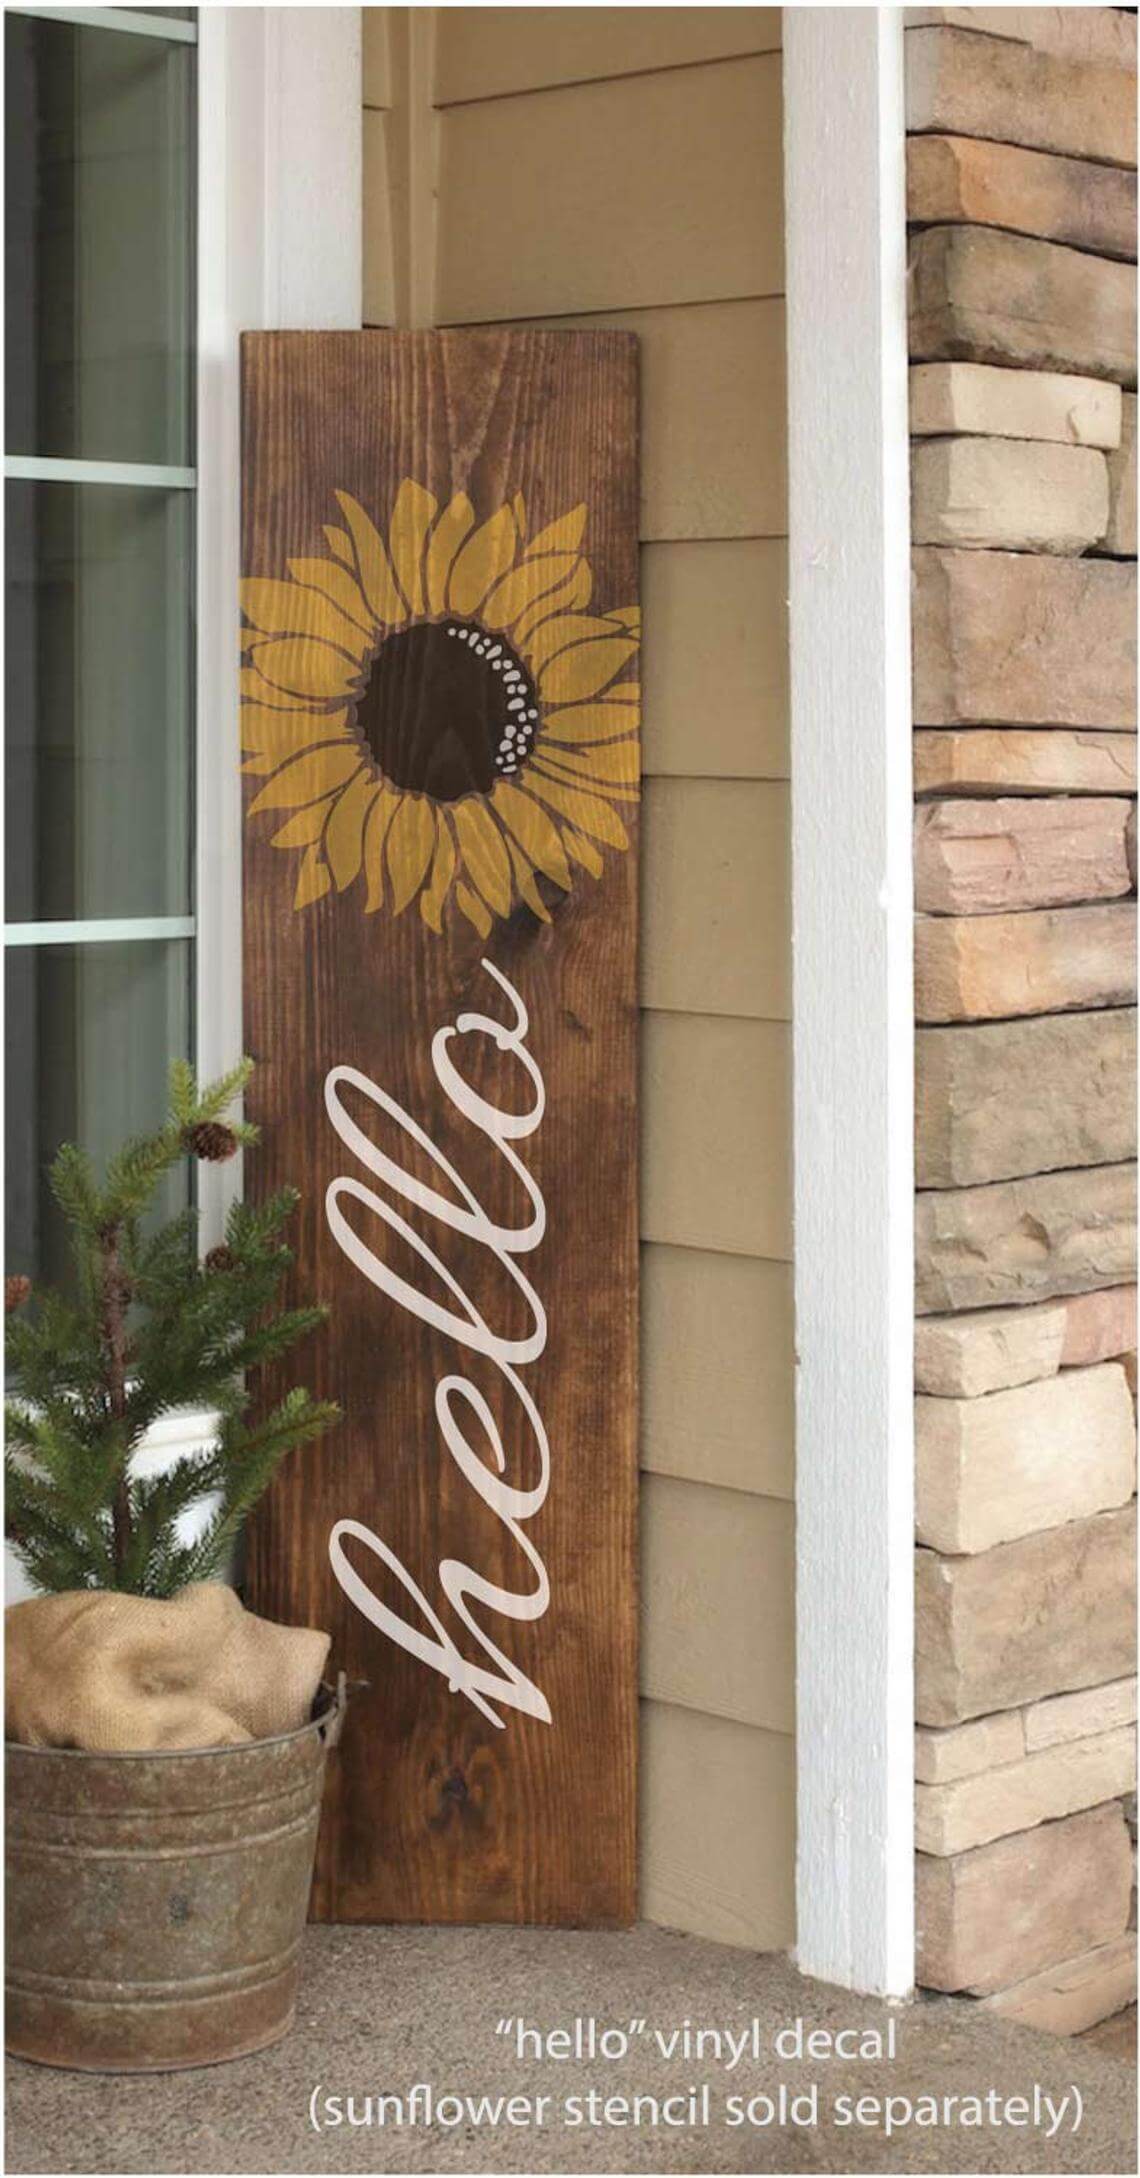 “hello” Vinyl Decal Sign Lettering